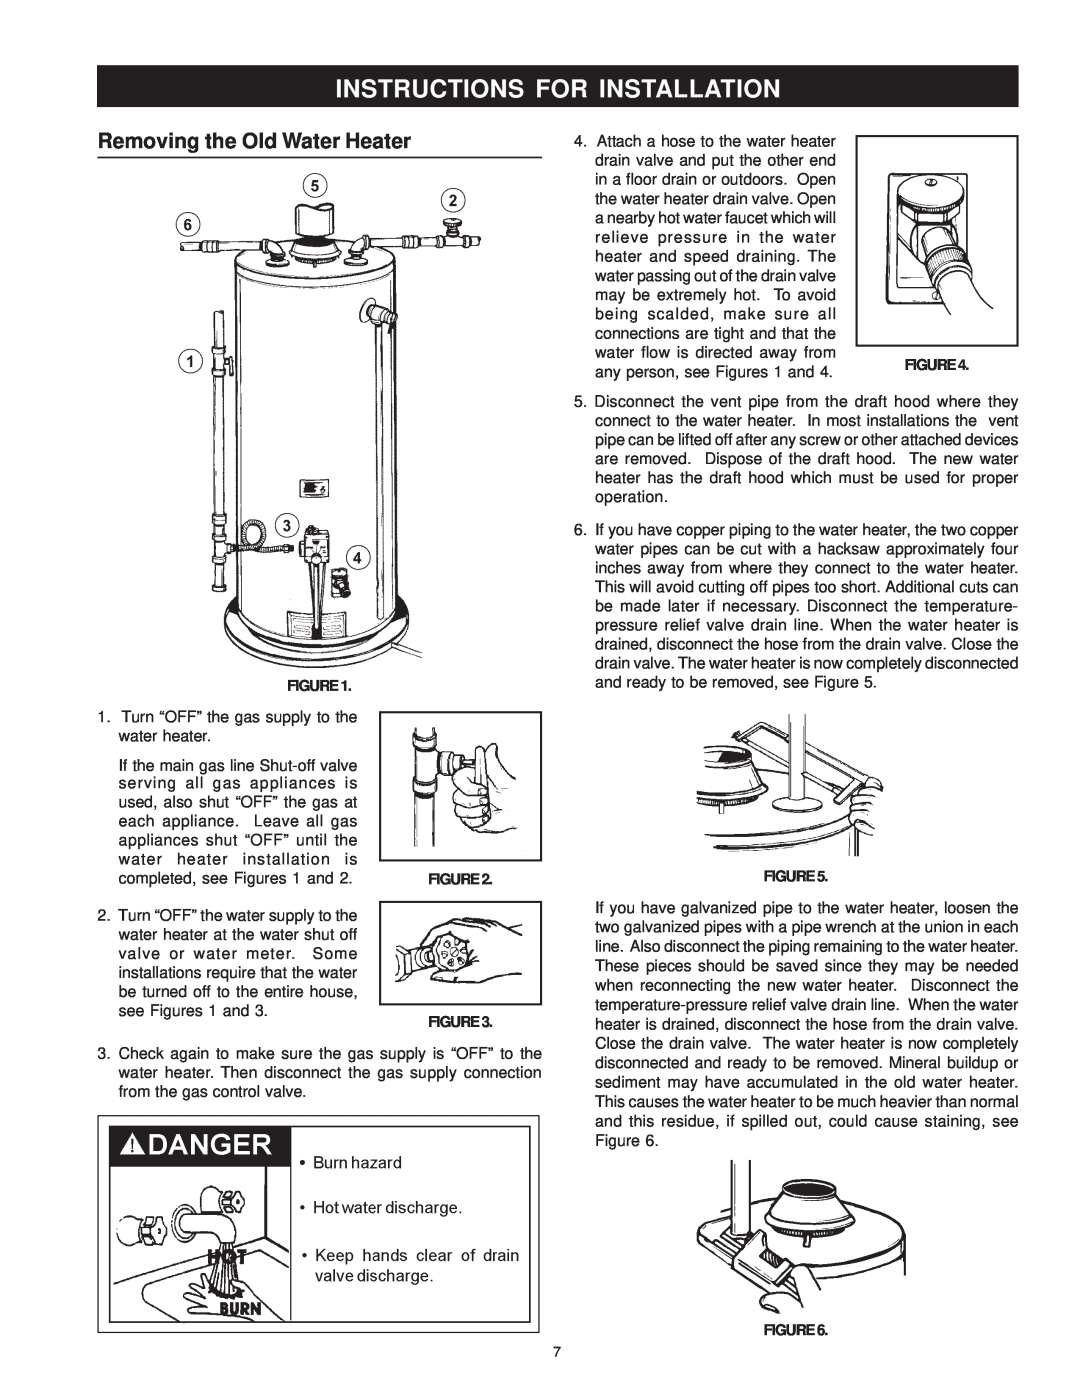 Maytag HRP31275P, HRN11250P, HRP31250P, HRP31240P, HRP11275P Instructions For Installation, Removing the Old Water Heater 